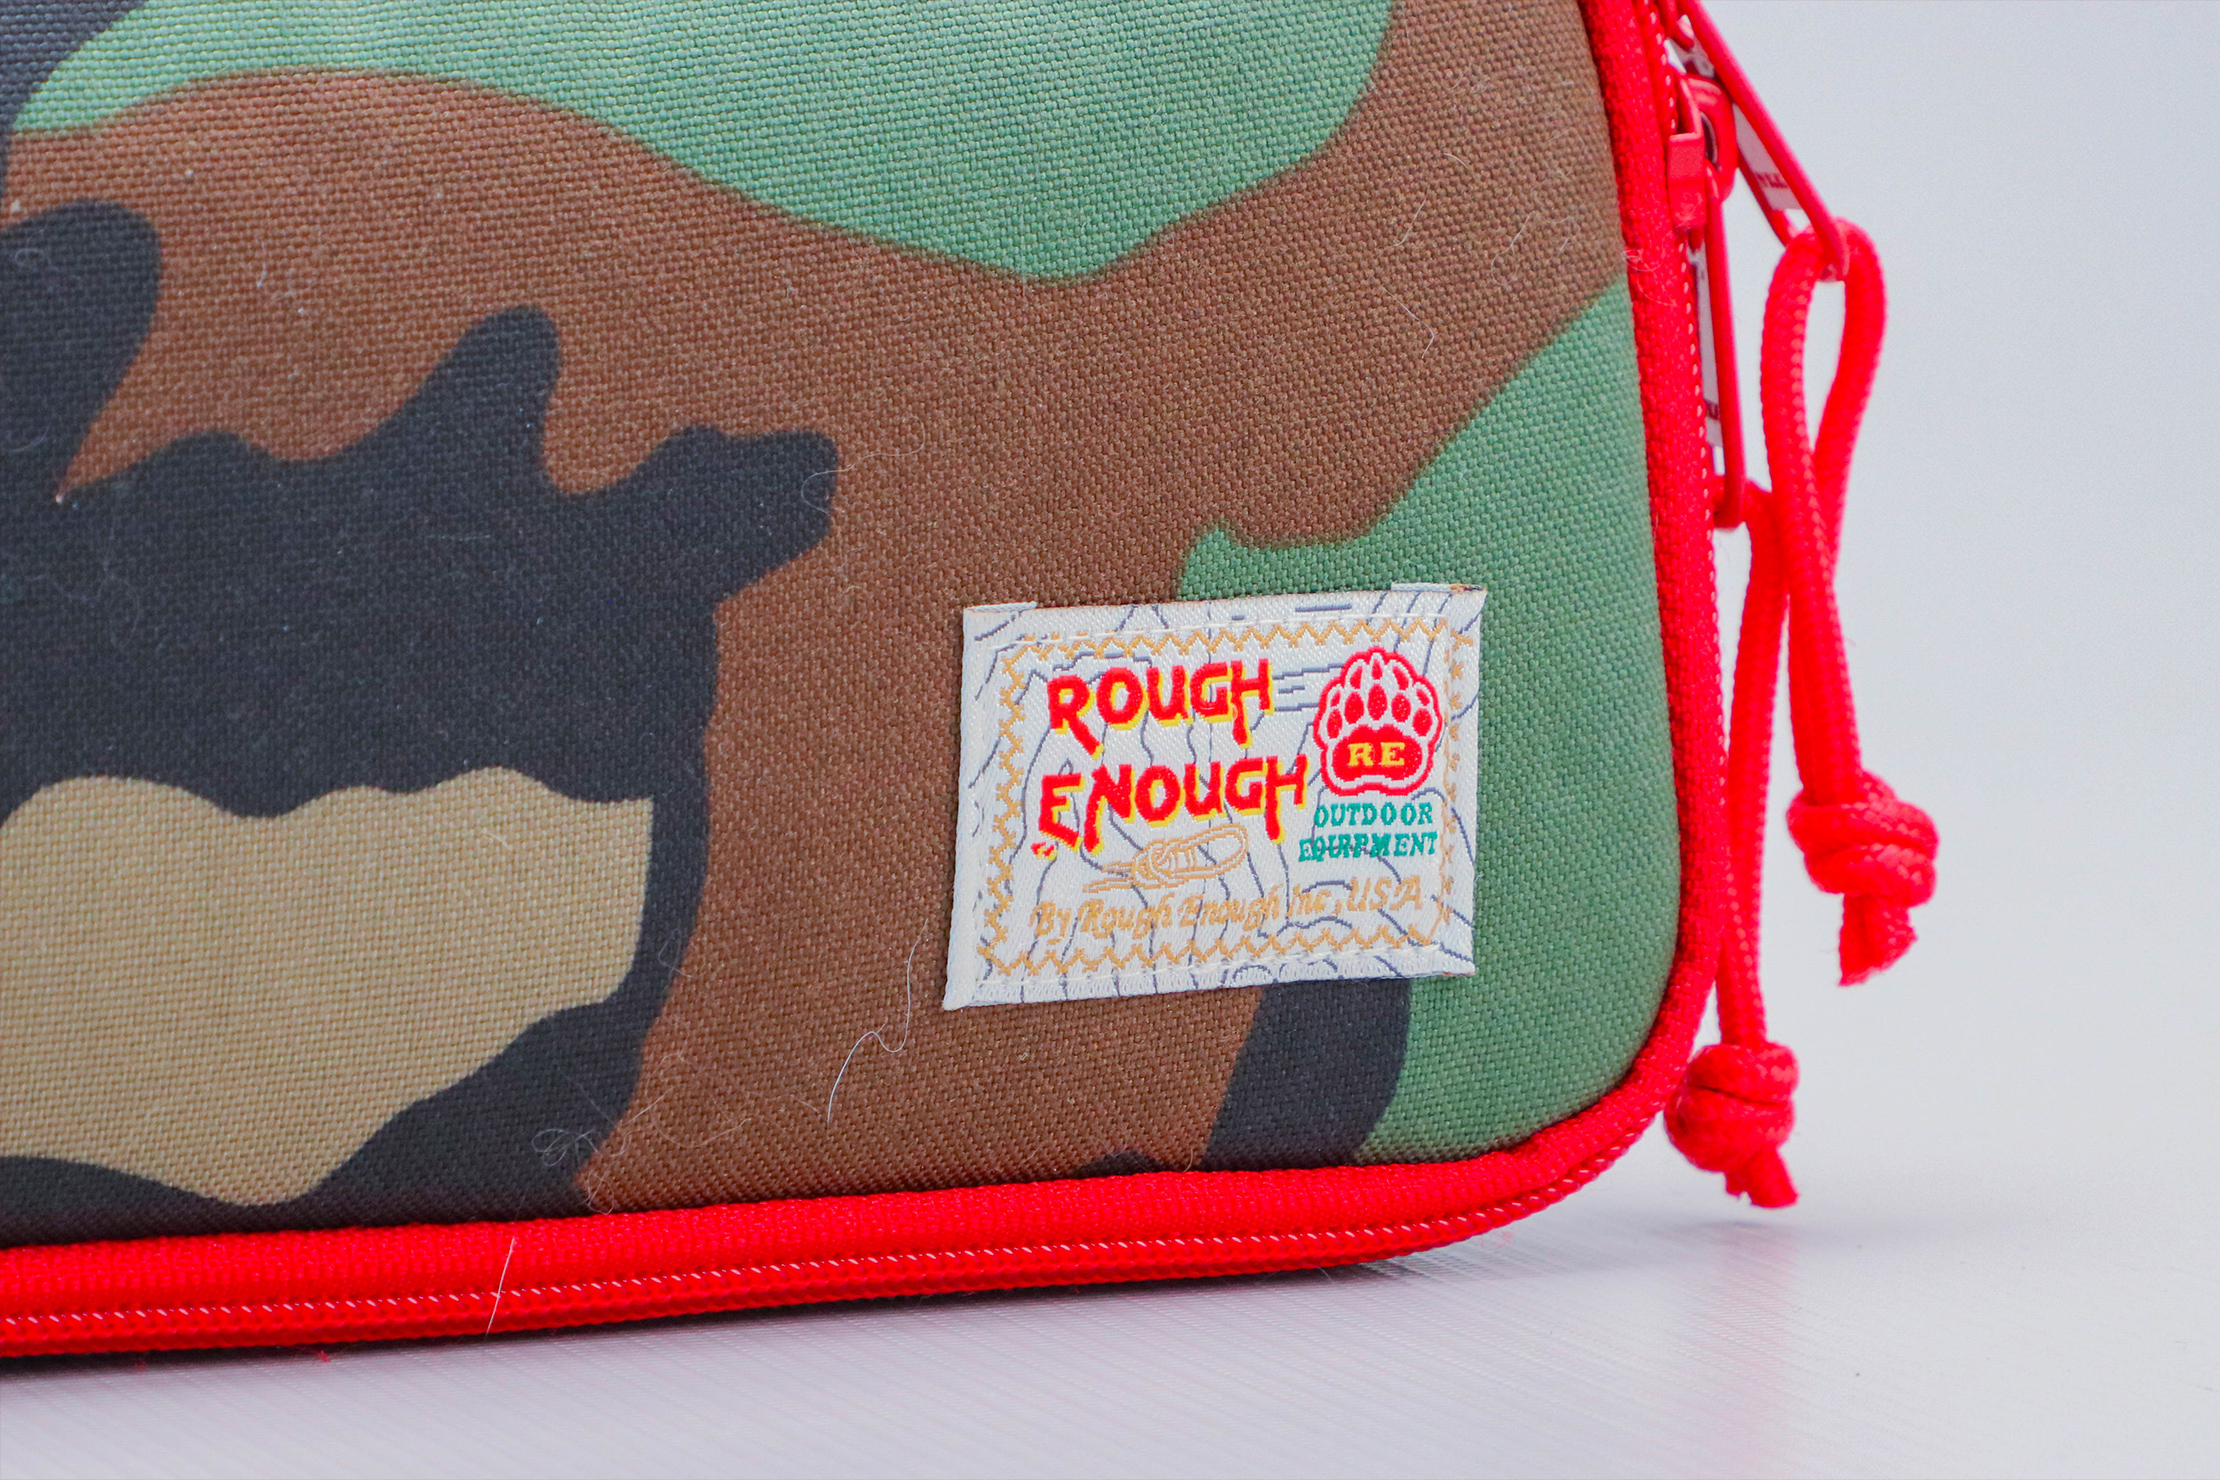 Rough Enough Small Tool Bag Pouch logo and fabric